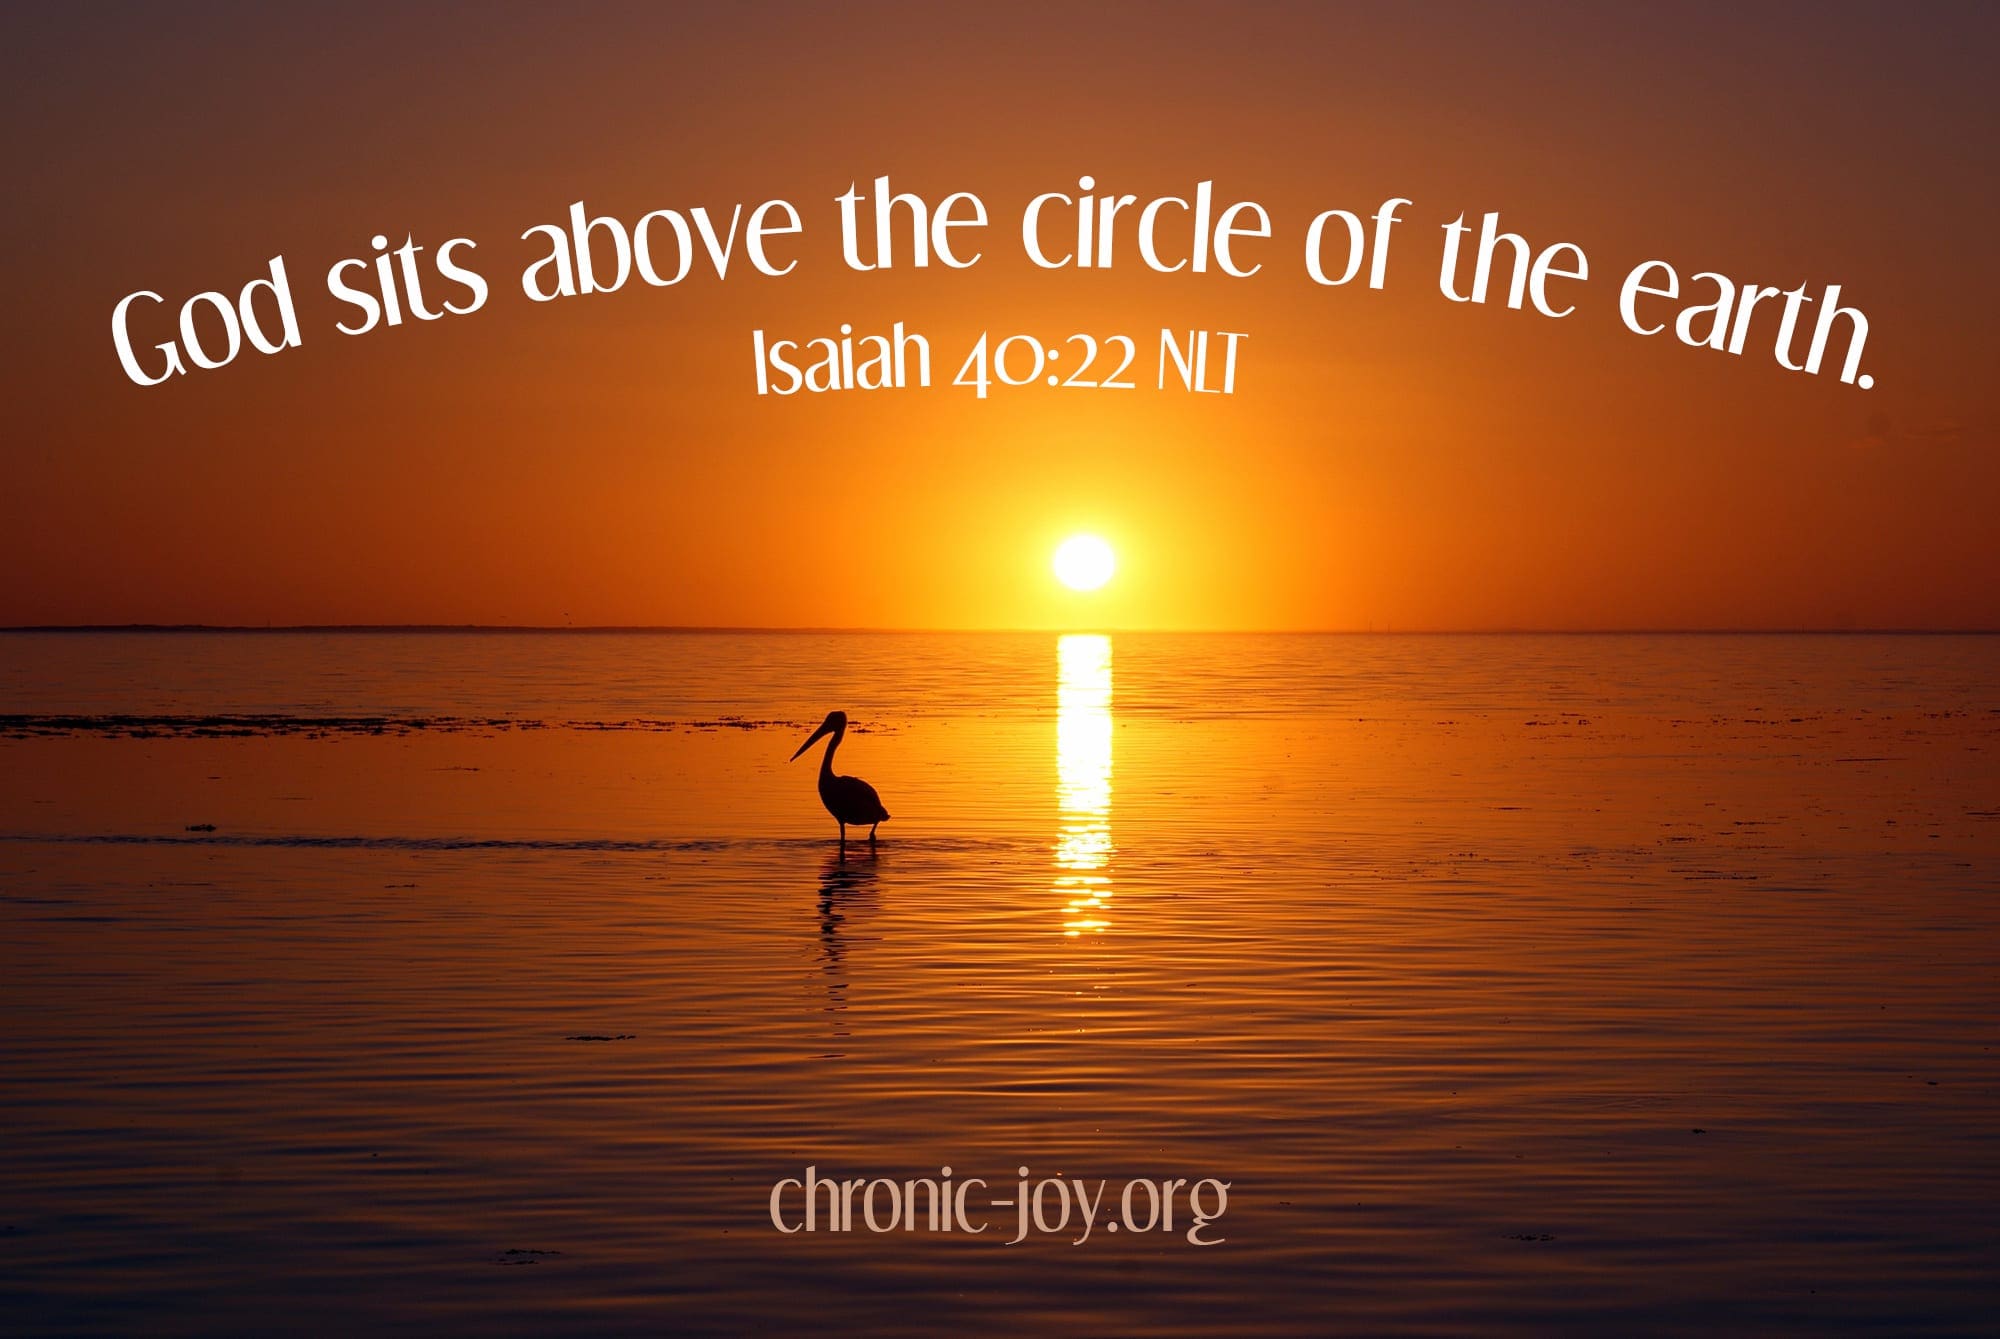 "God sits above the circle of the earth." Isaiah 40:22 NLT